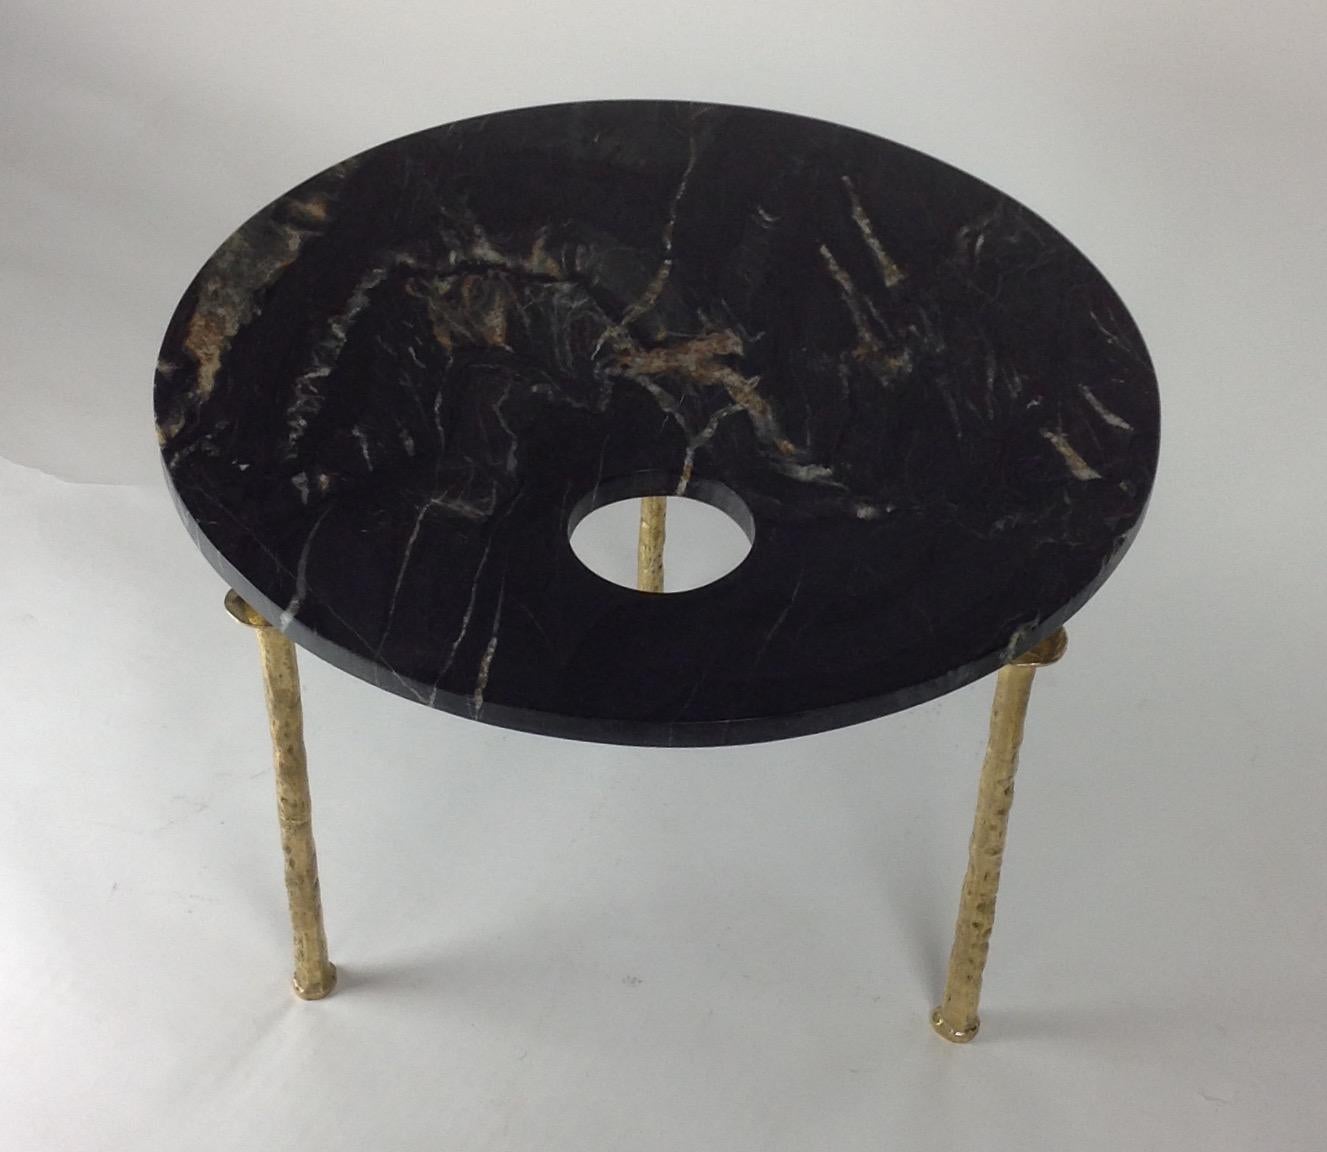 American Sorgue Side Table, Black Marble with Brass Legs, by Bourgeois Boheme Atelier